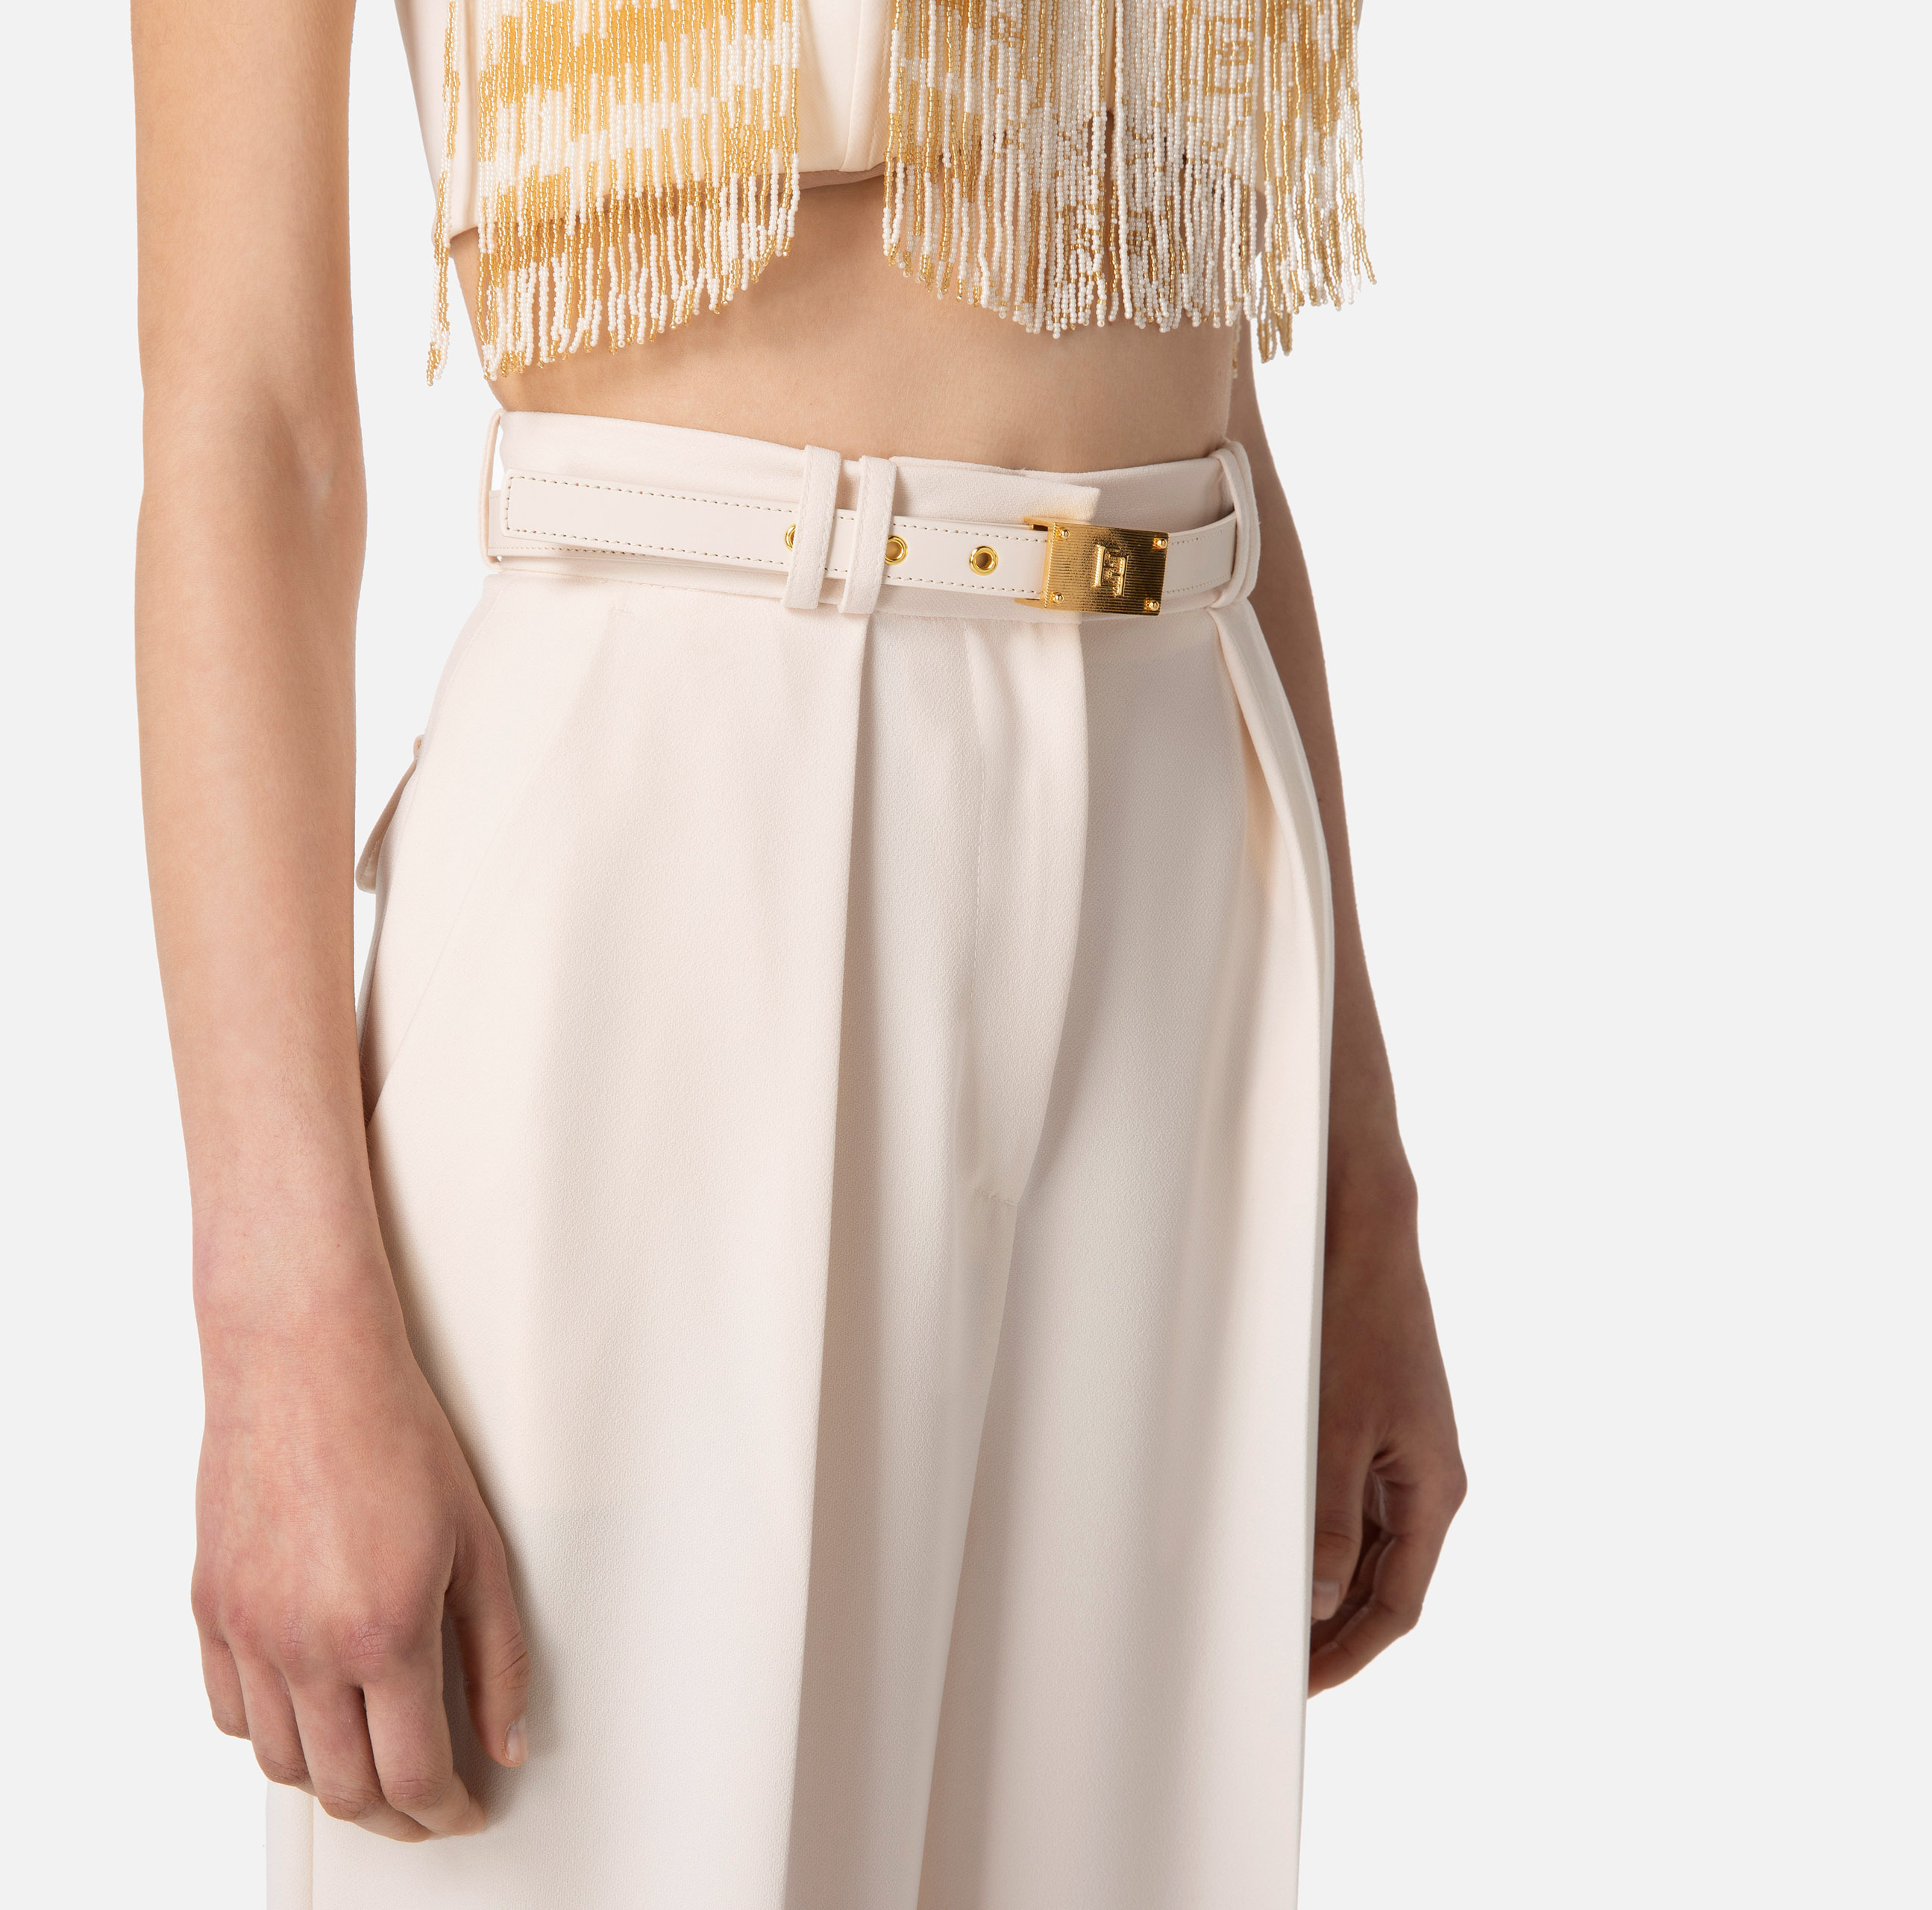 Palazzo trousers in crêpe fabric with belt - Elisabetta Franchi